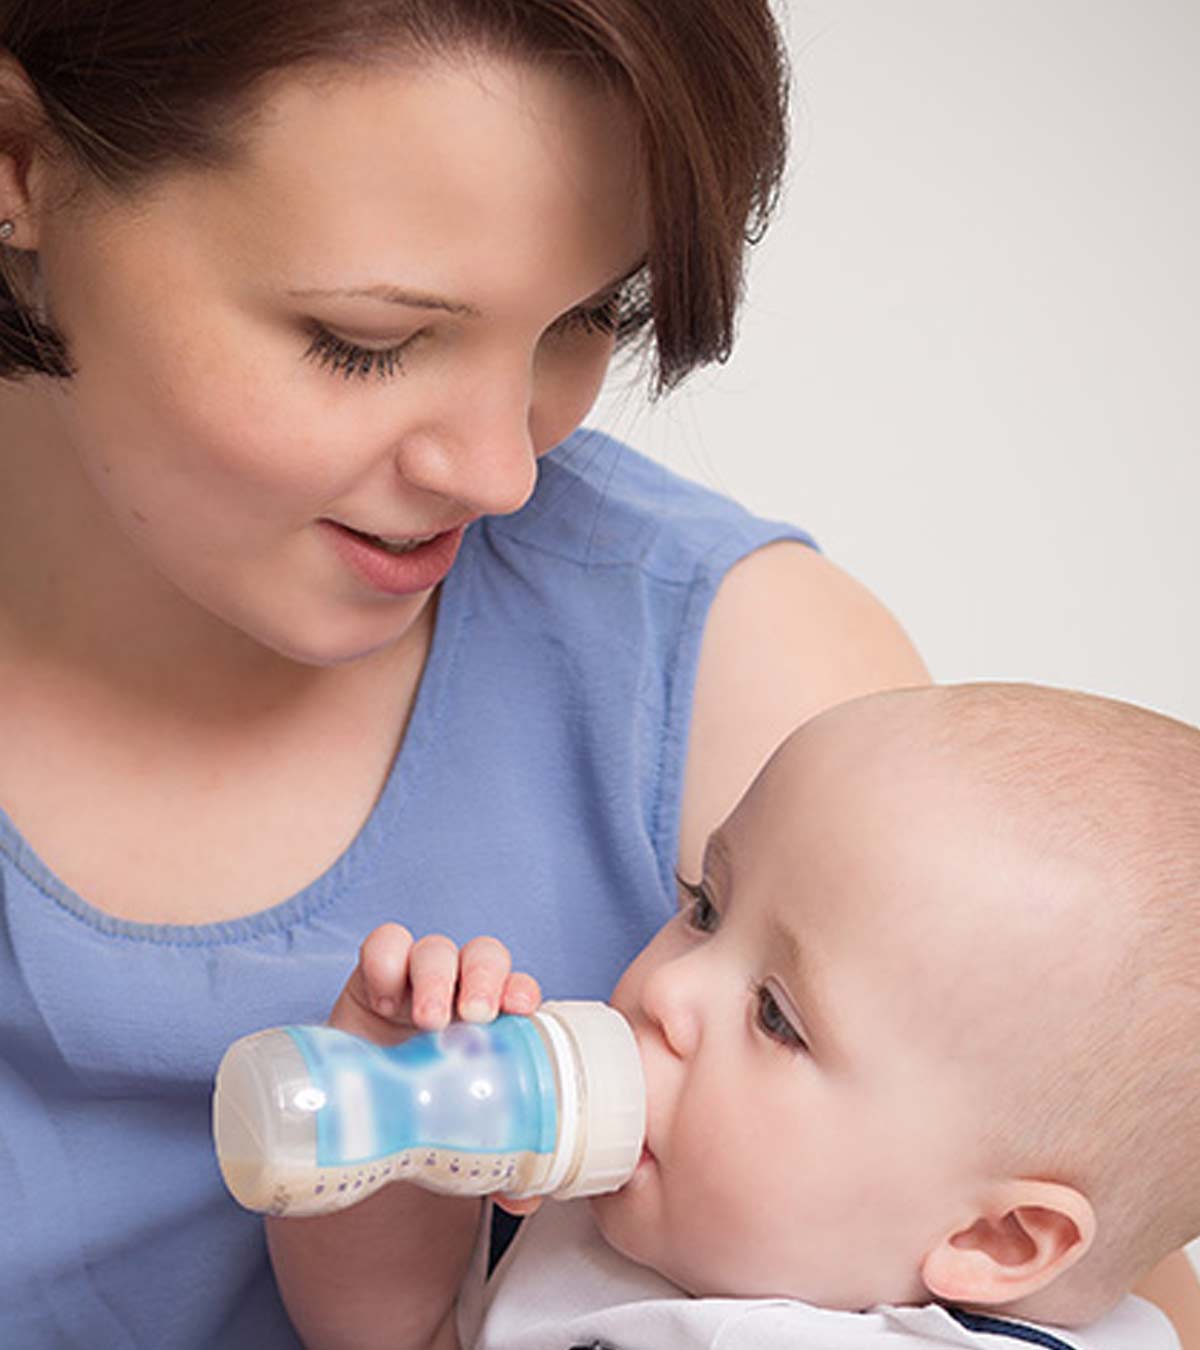 When Babies Can Have Soy Milk, And Myths About Soy Formula